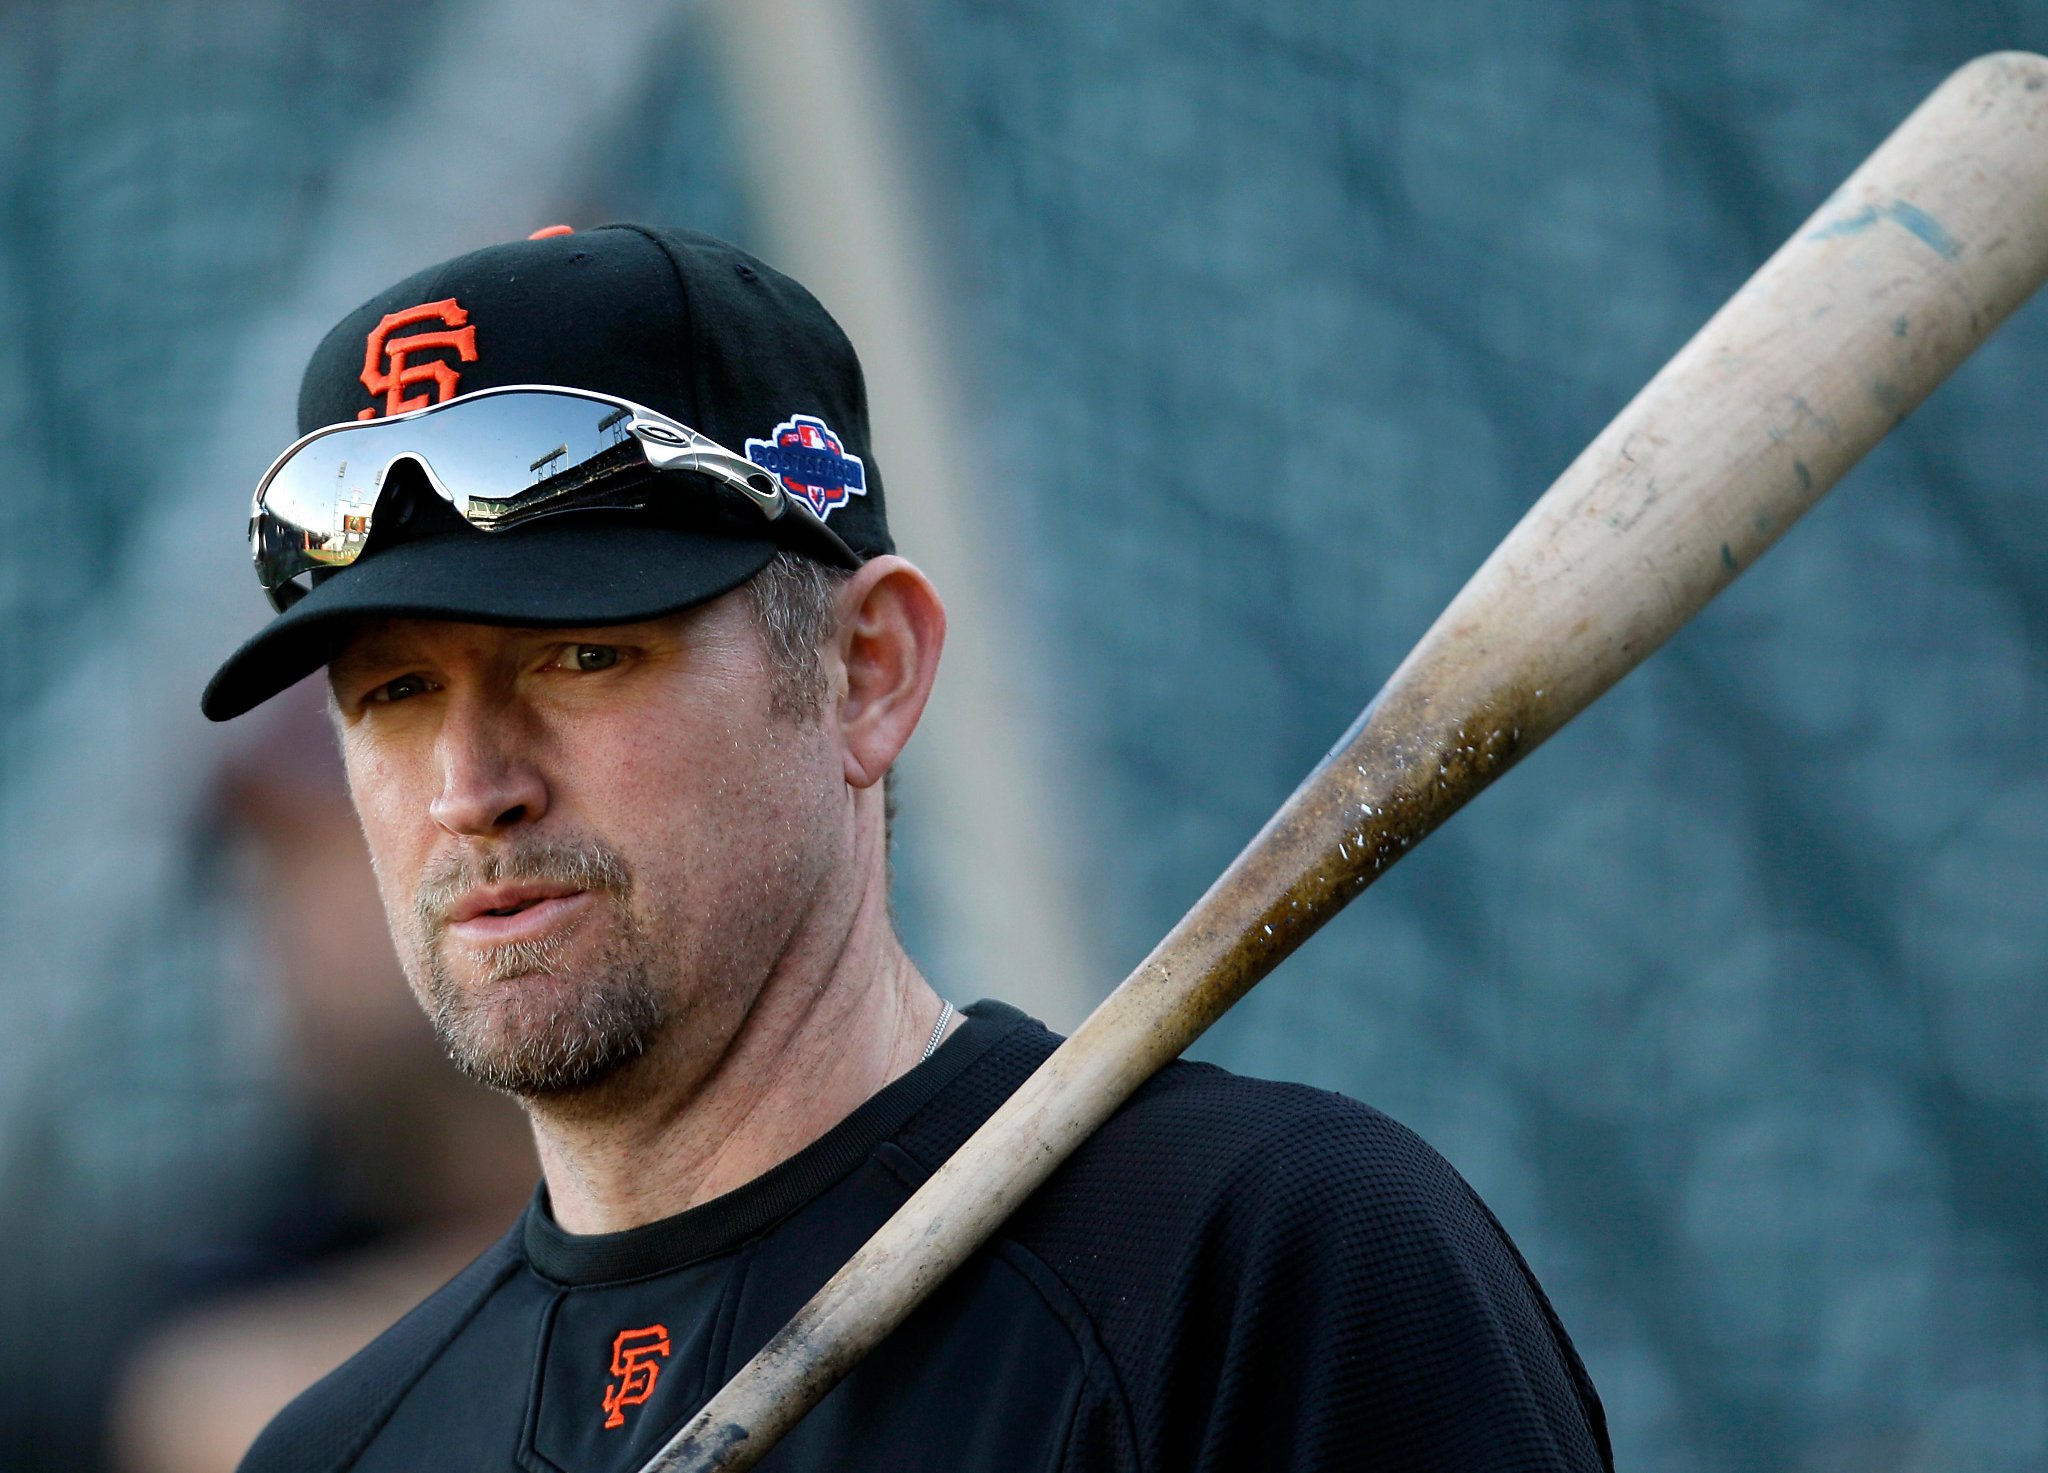 Giants tell Aubrey Huff he's not invited to 2010 World Series reunion.